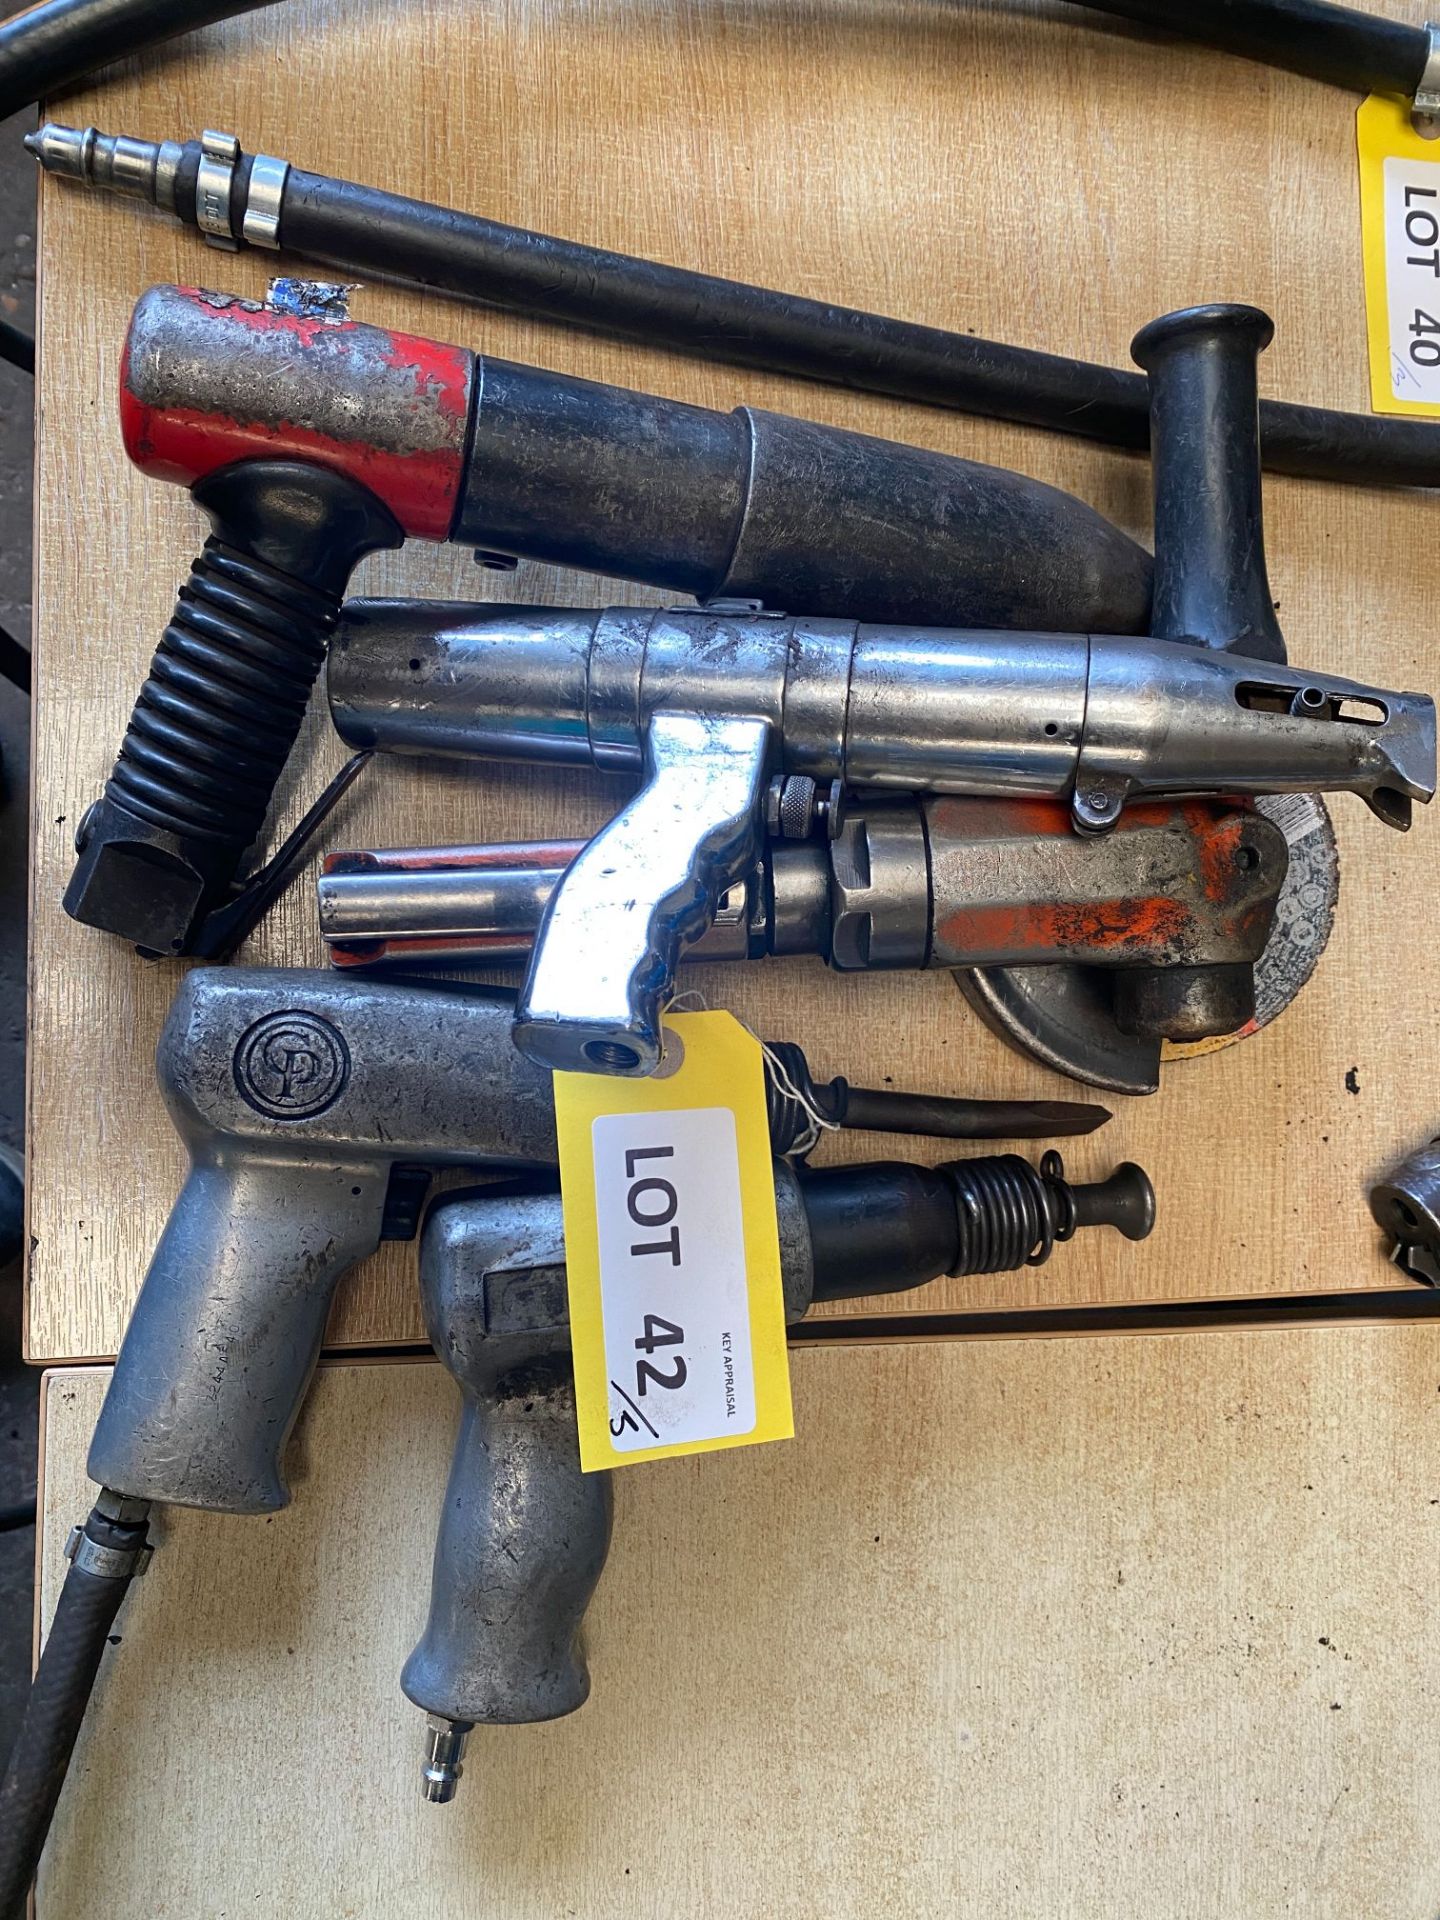 5 x various air driven tools, as lotted